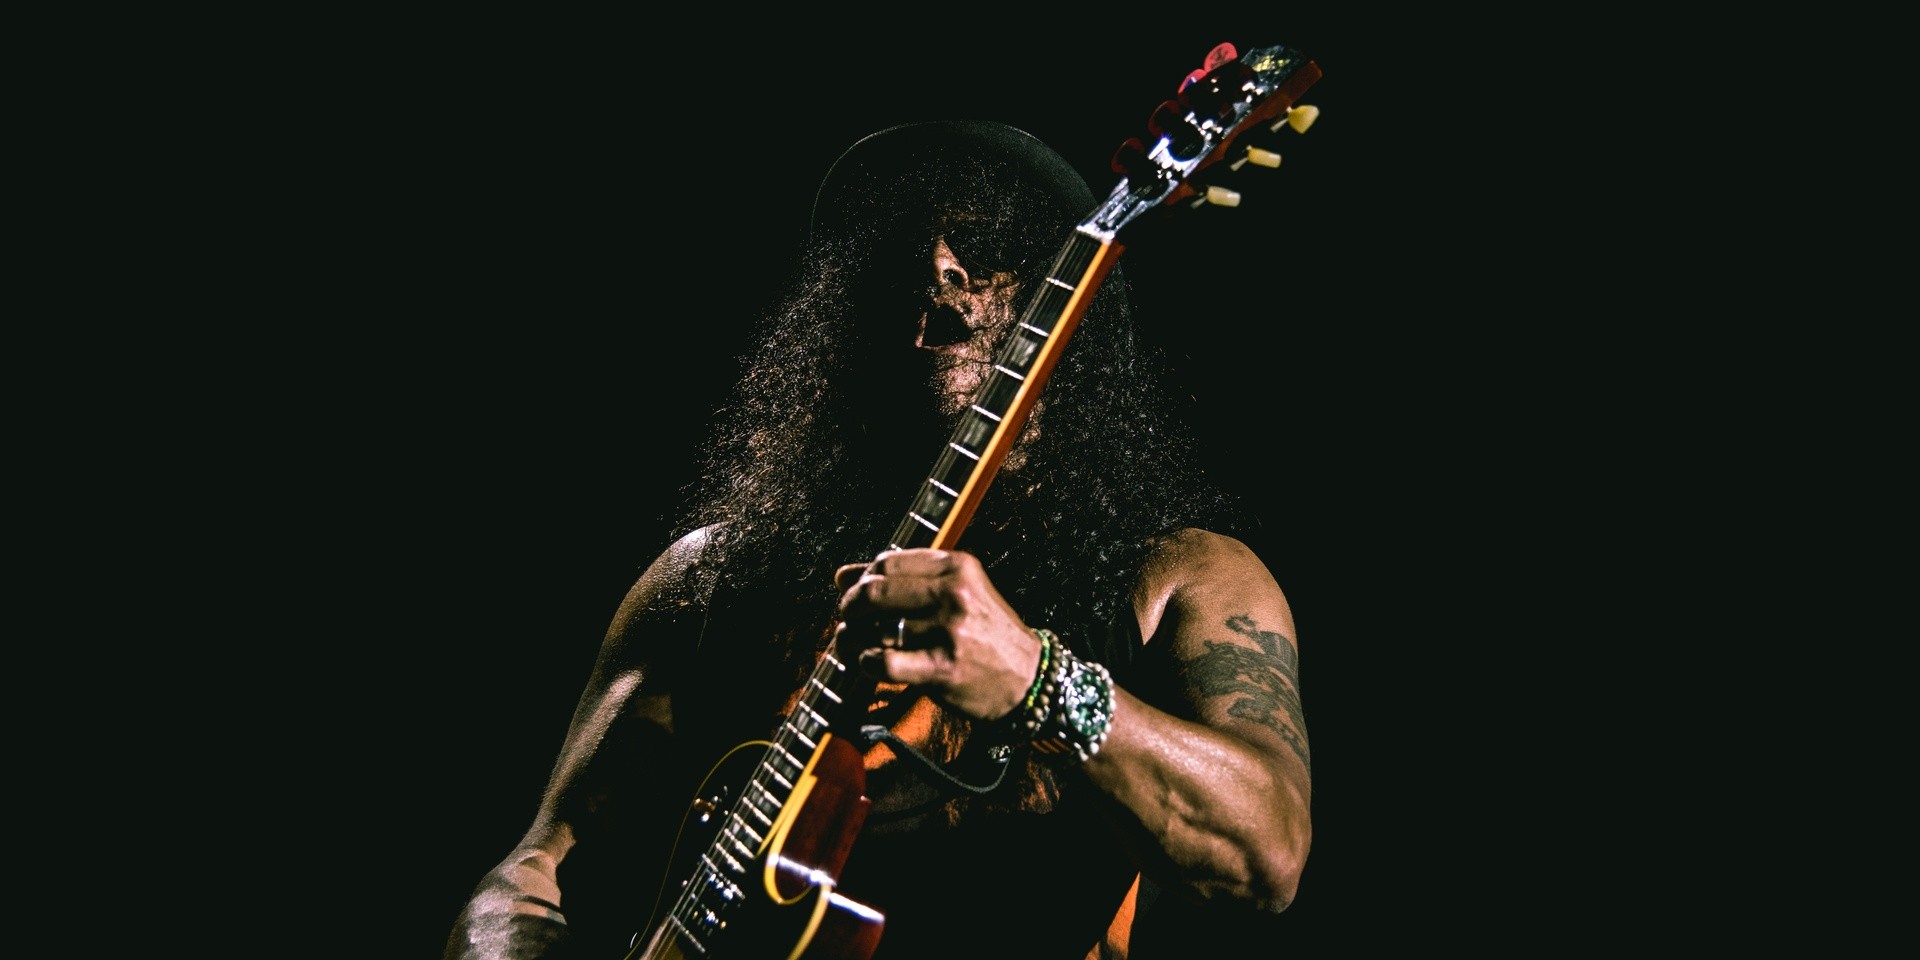 Slash featuring Myles Kennedy and The Conspirators invoke glory days of rock ’n’ roll at Singapore show – gig report